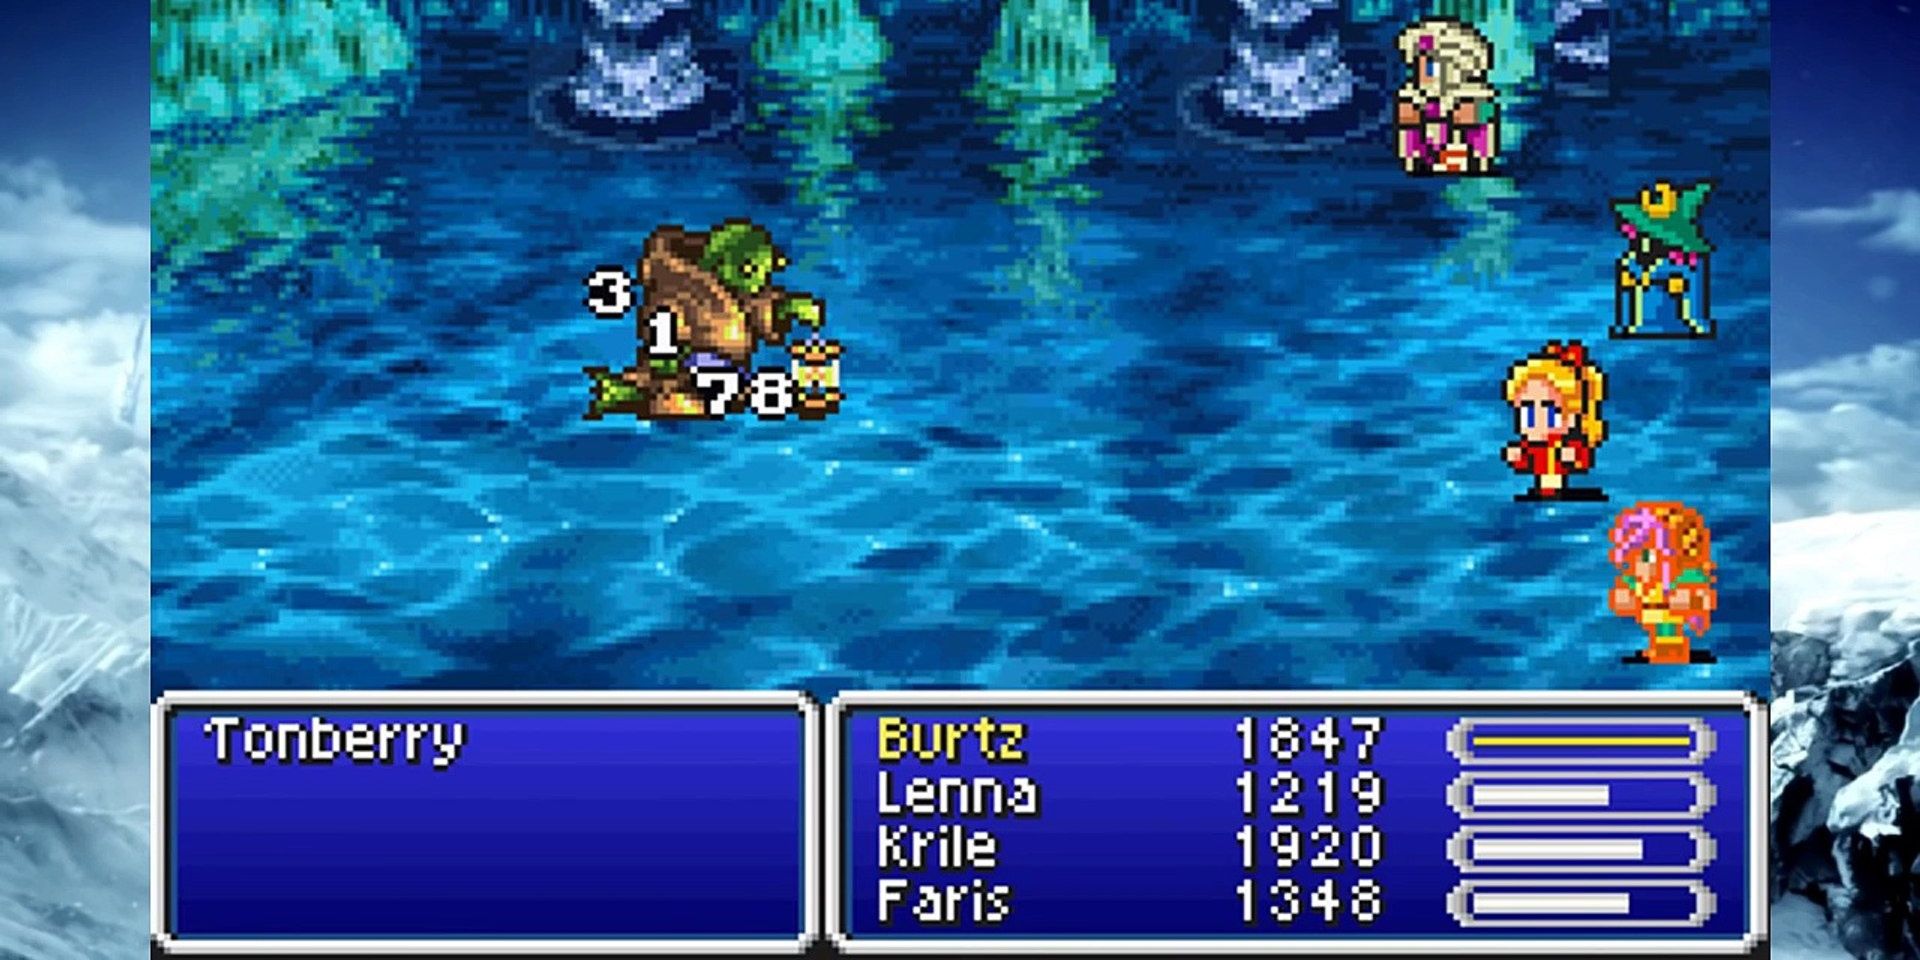 A Tonberry in Final Fantasy 5